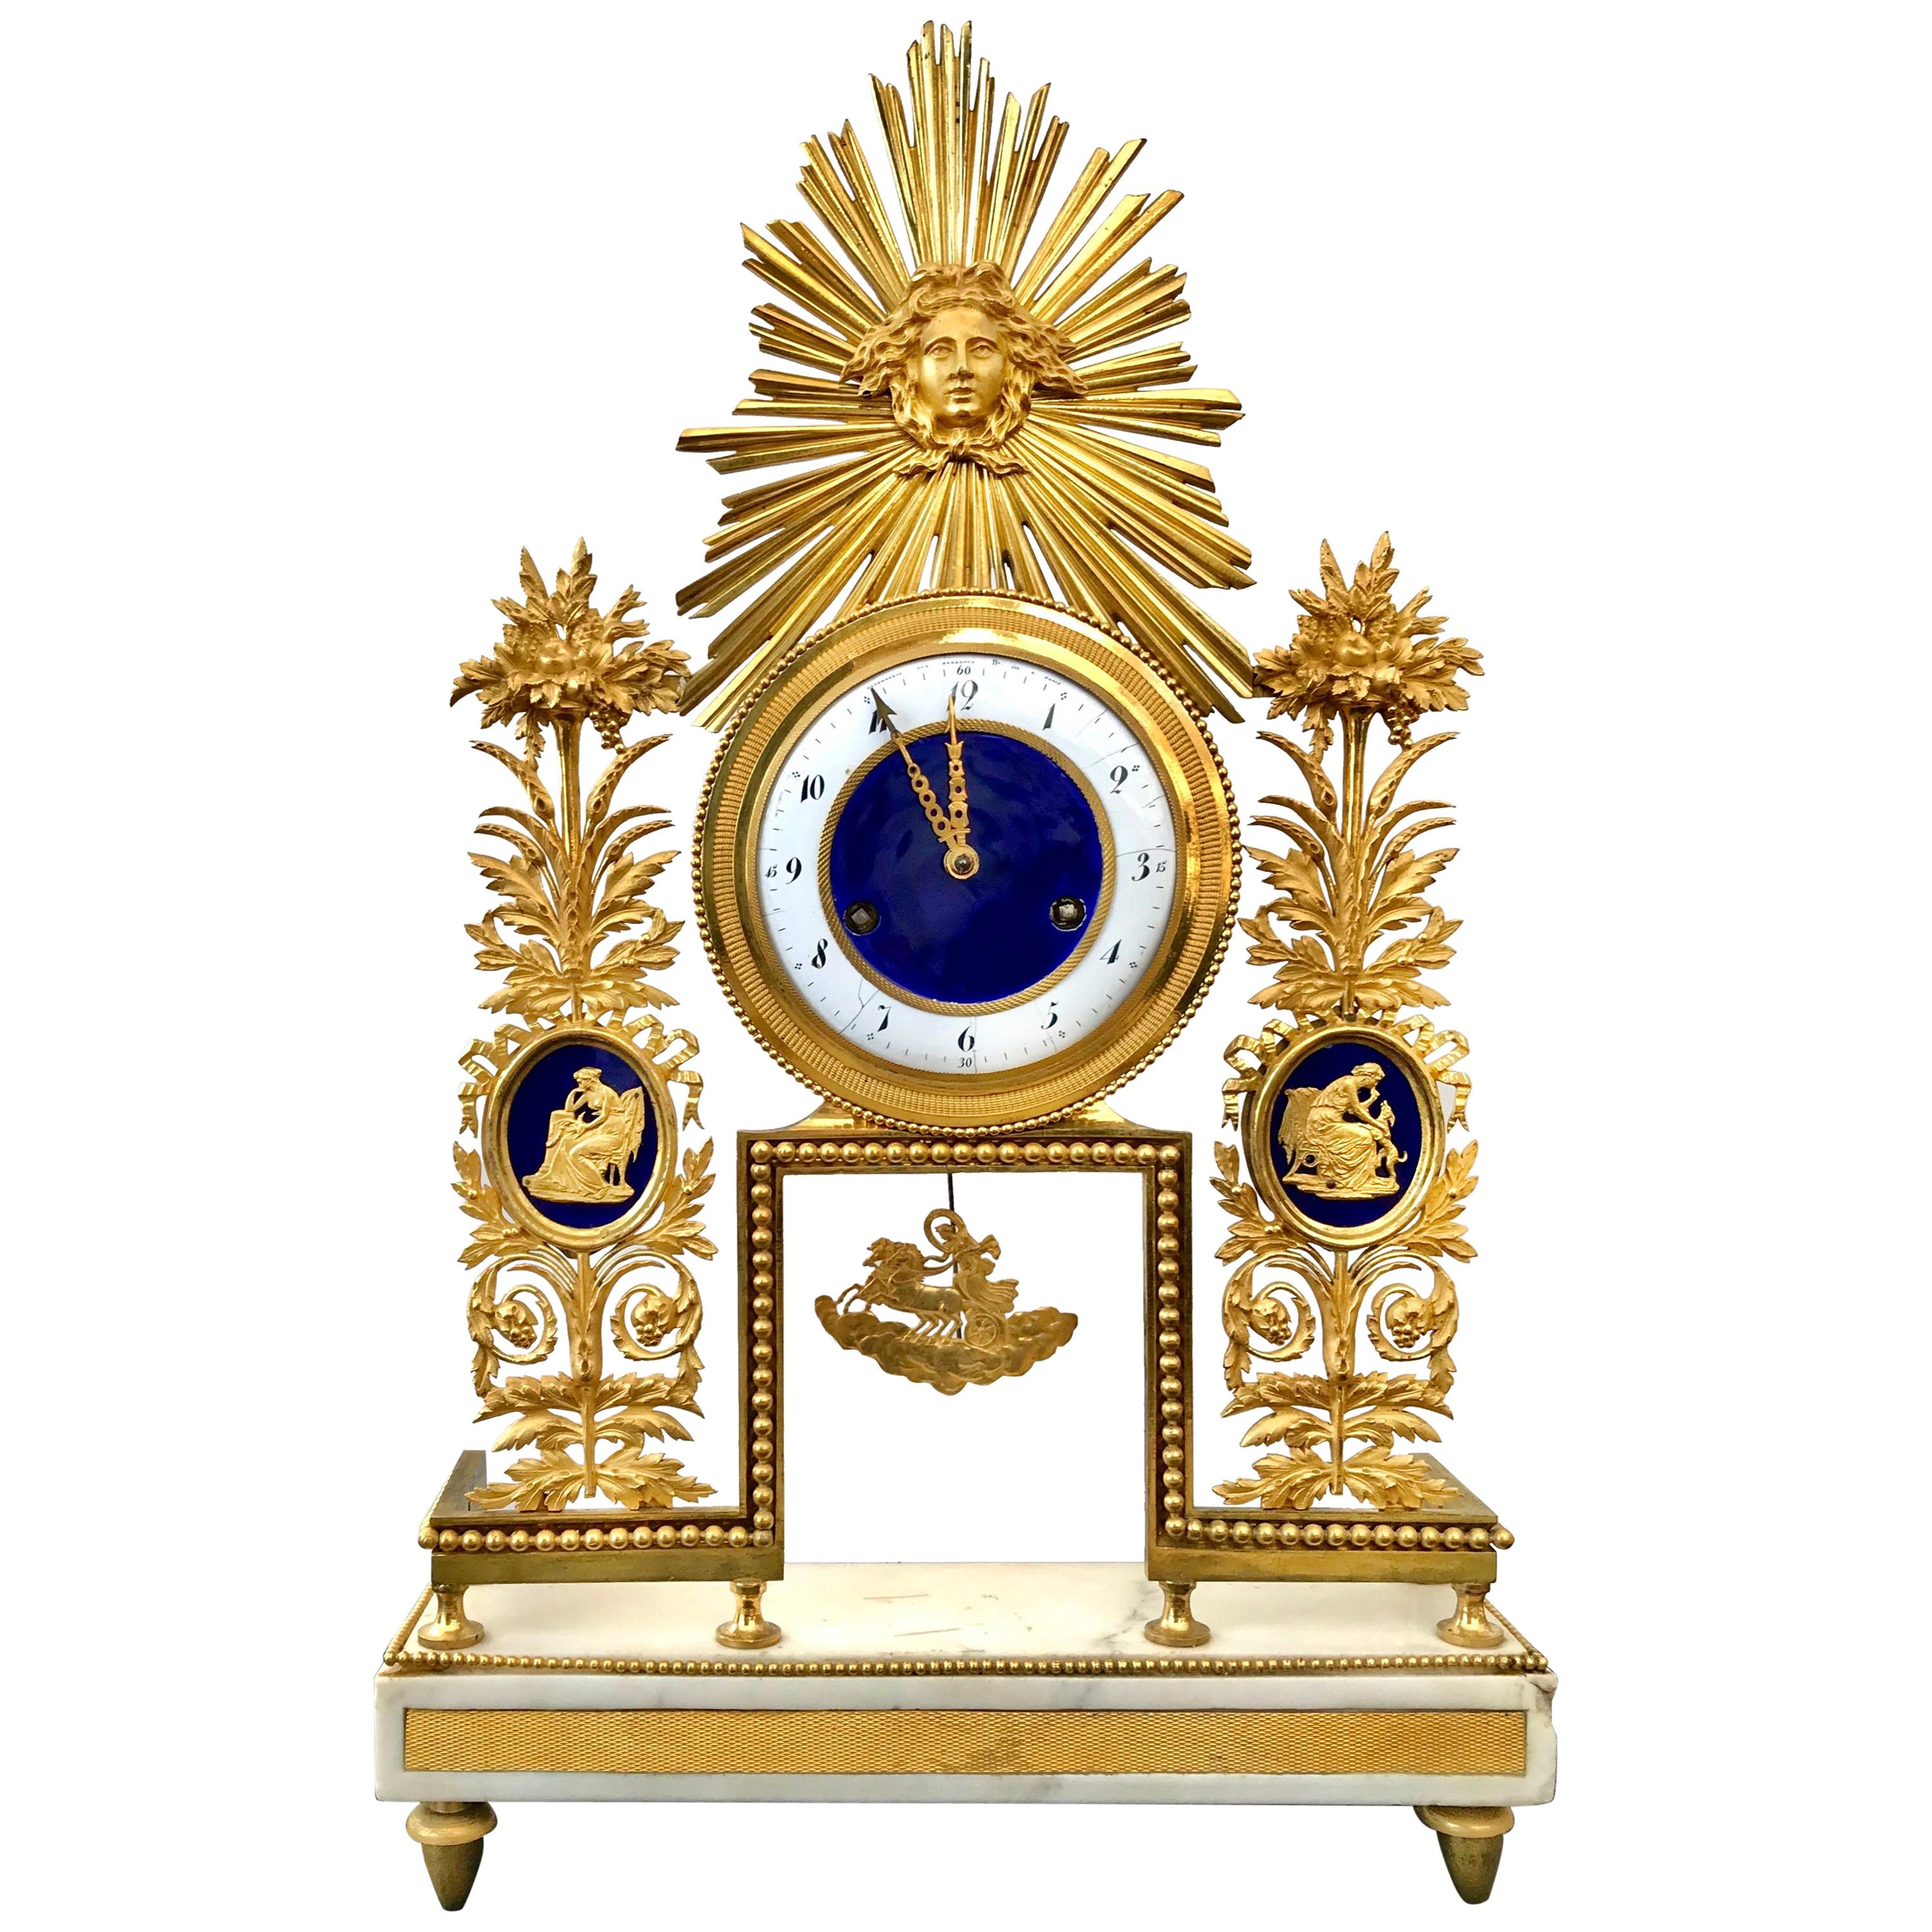 18th Century French Directoire Ormolu and Enamel Clock by Deverberie